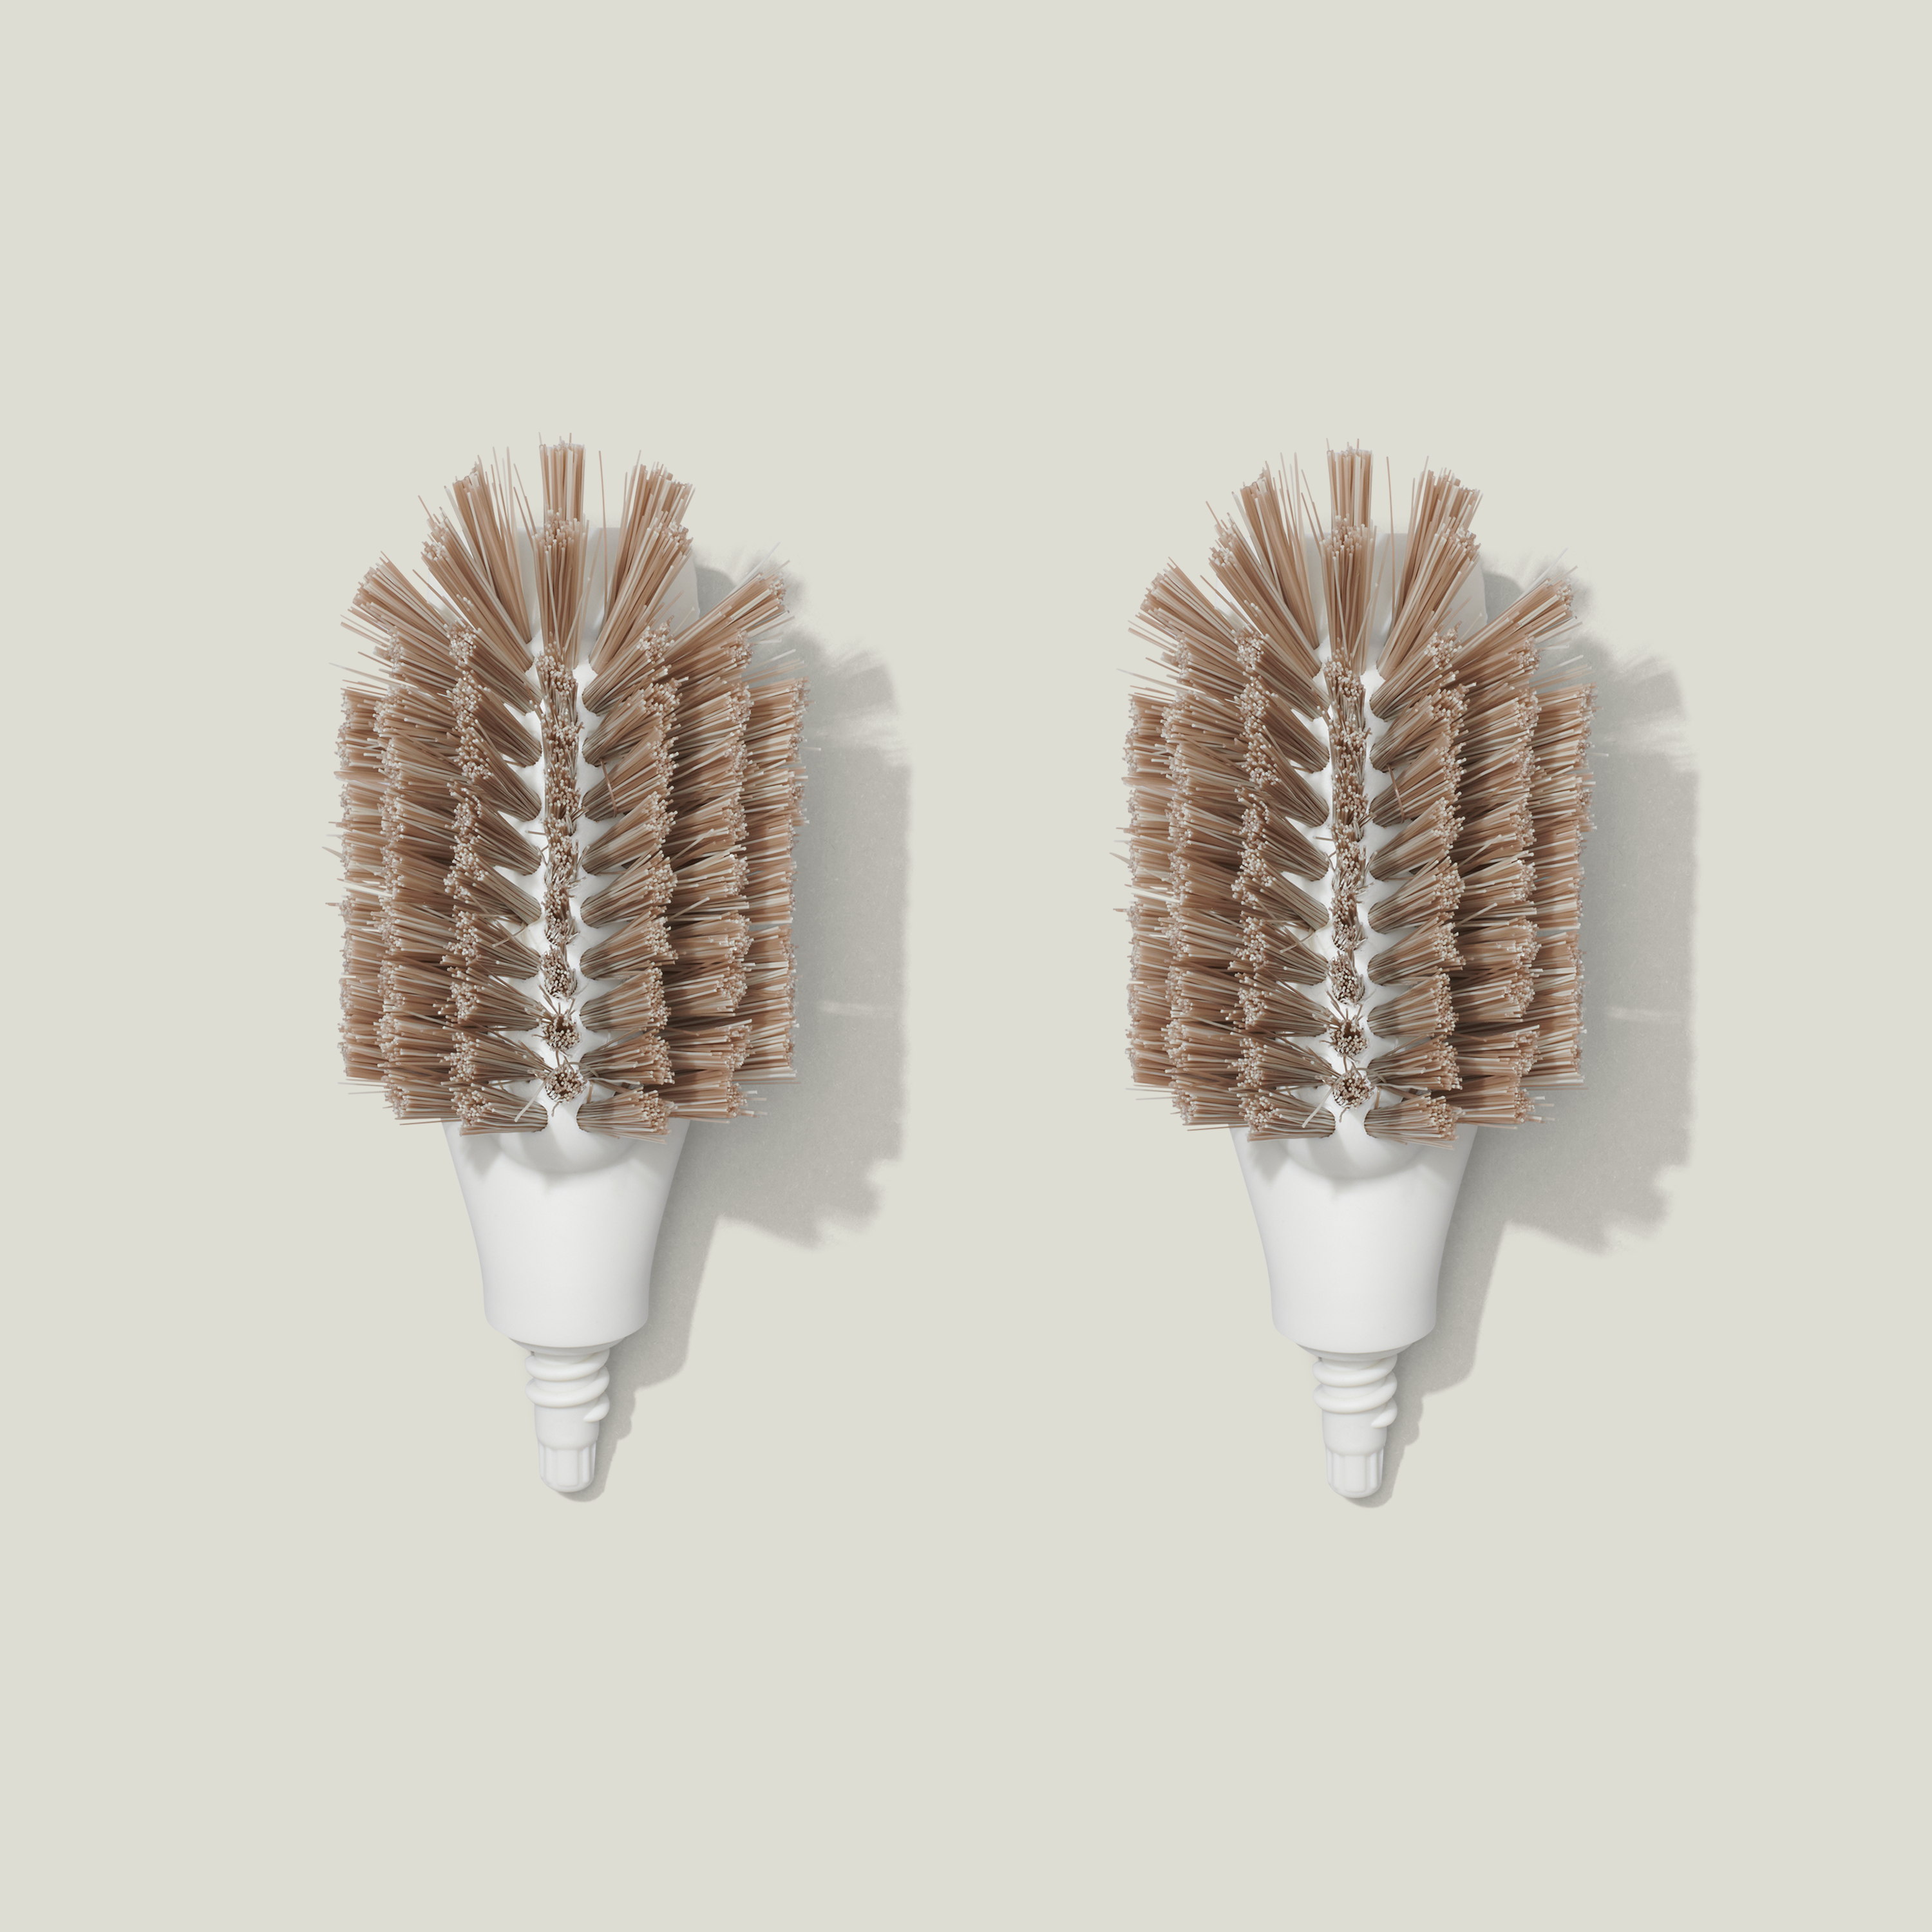 Curio Homegoods 2-pack The Ionic Dish Brush Bristles in White